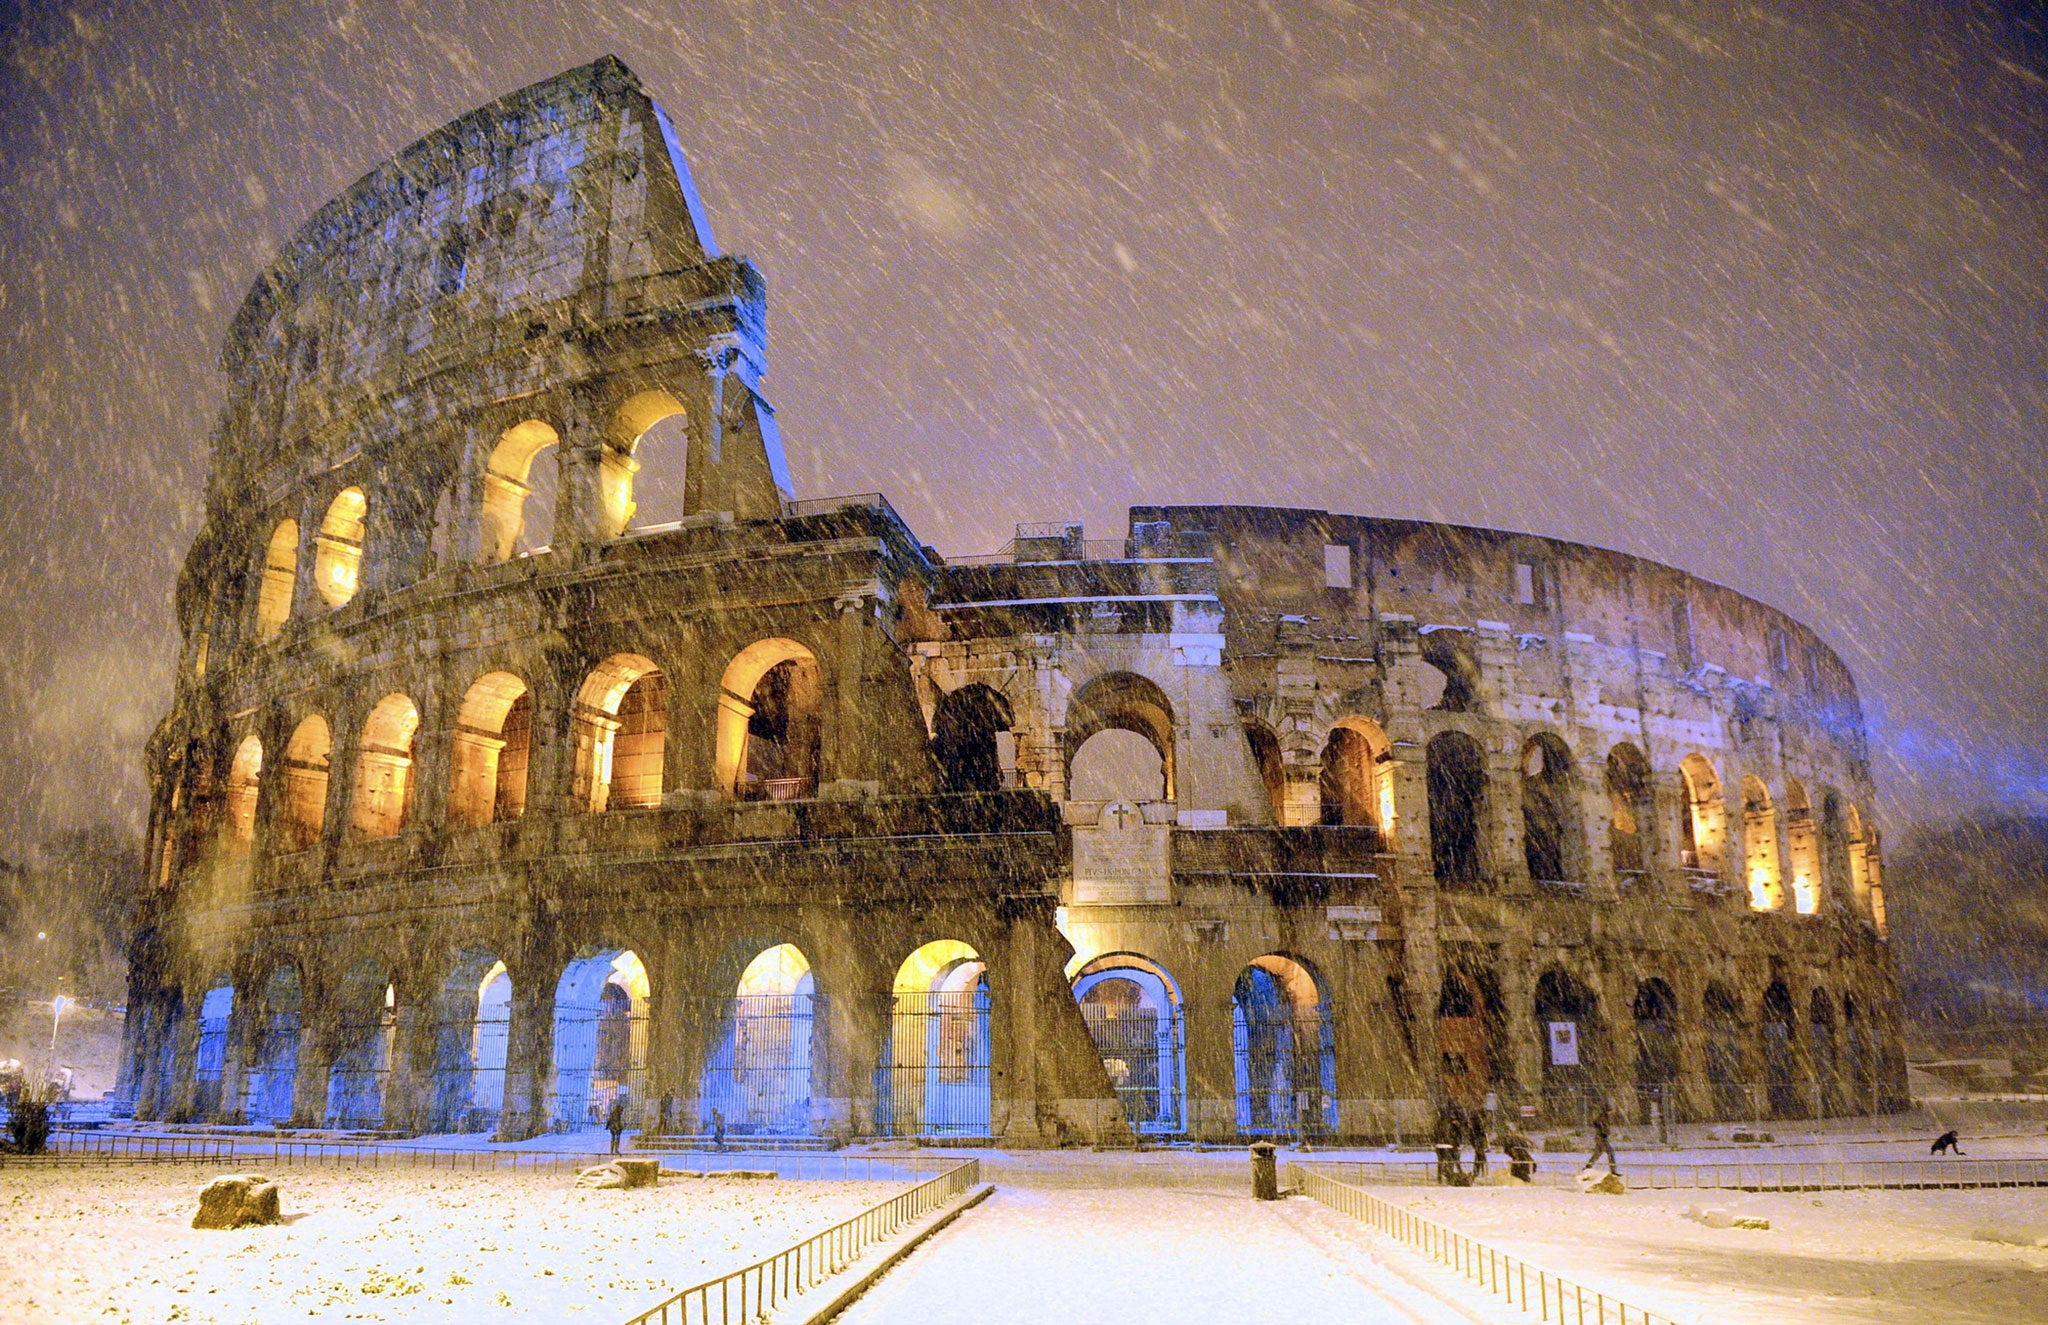 A rare snow shower falls on Rome's Colosseum, built 2,000 years ago to host gladiator duels, battle reenactments, and other public spectacles. Today the 50,000-seat amphitheater serves Rome in another capacity: as a major tourist attraction